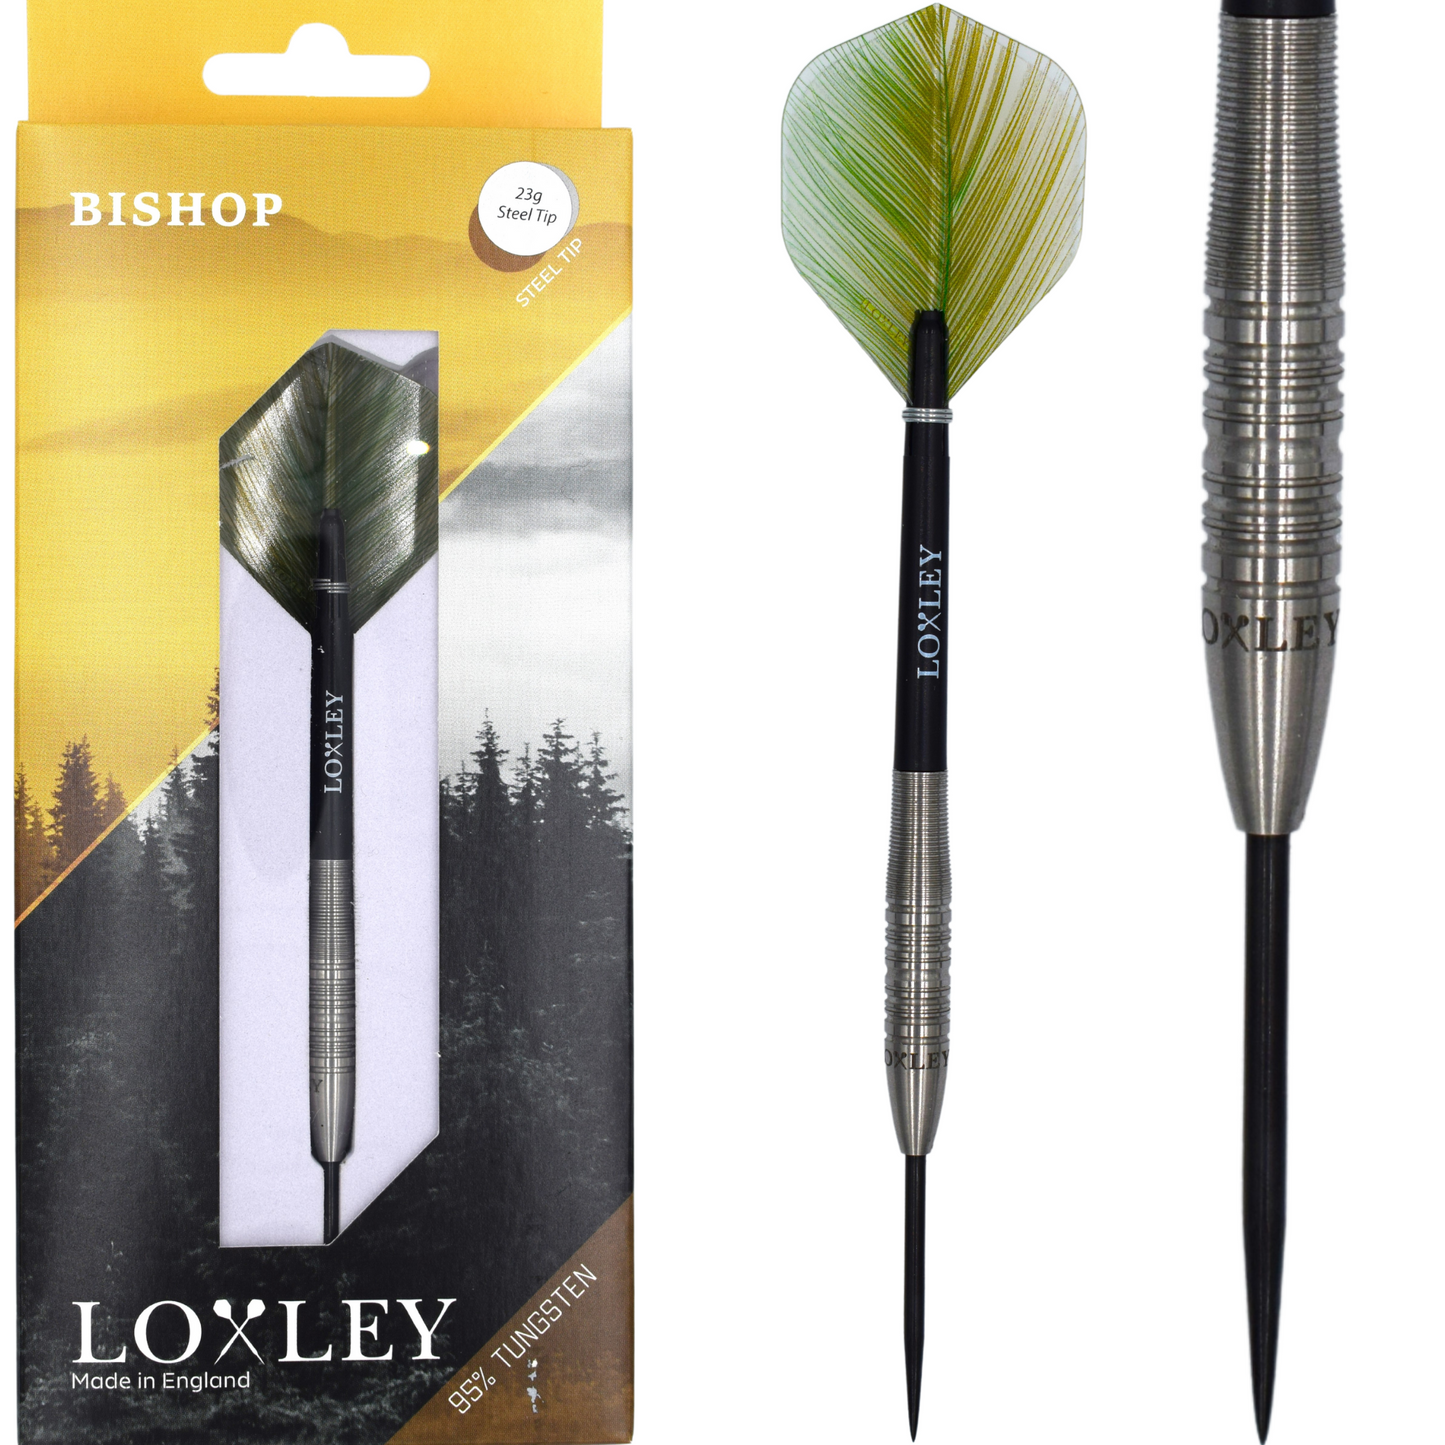 LOXLEY - Loxley 'The Bishop' Darts - 21g, 23g & 25g